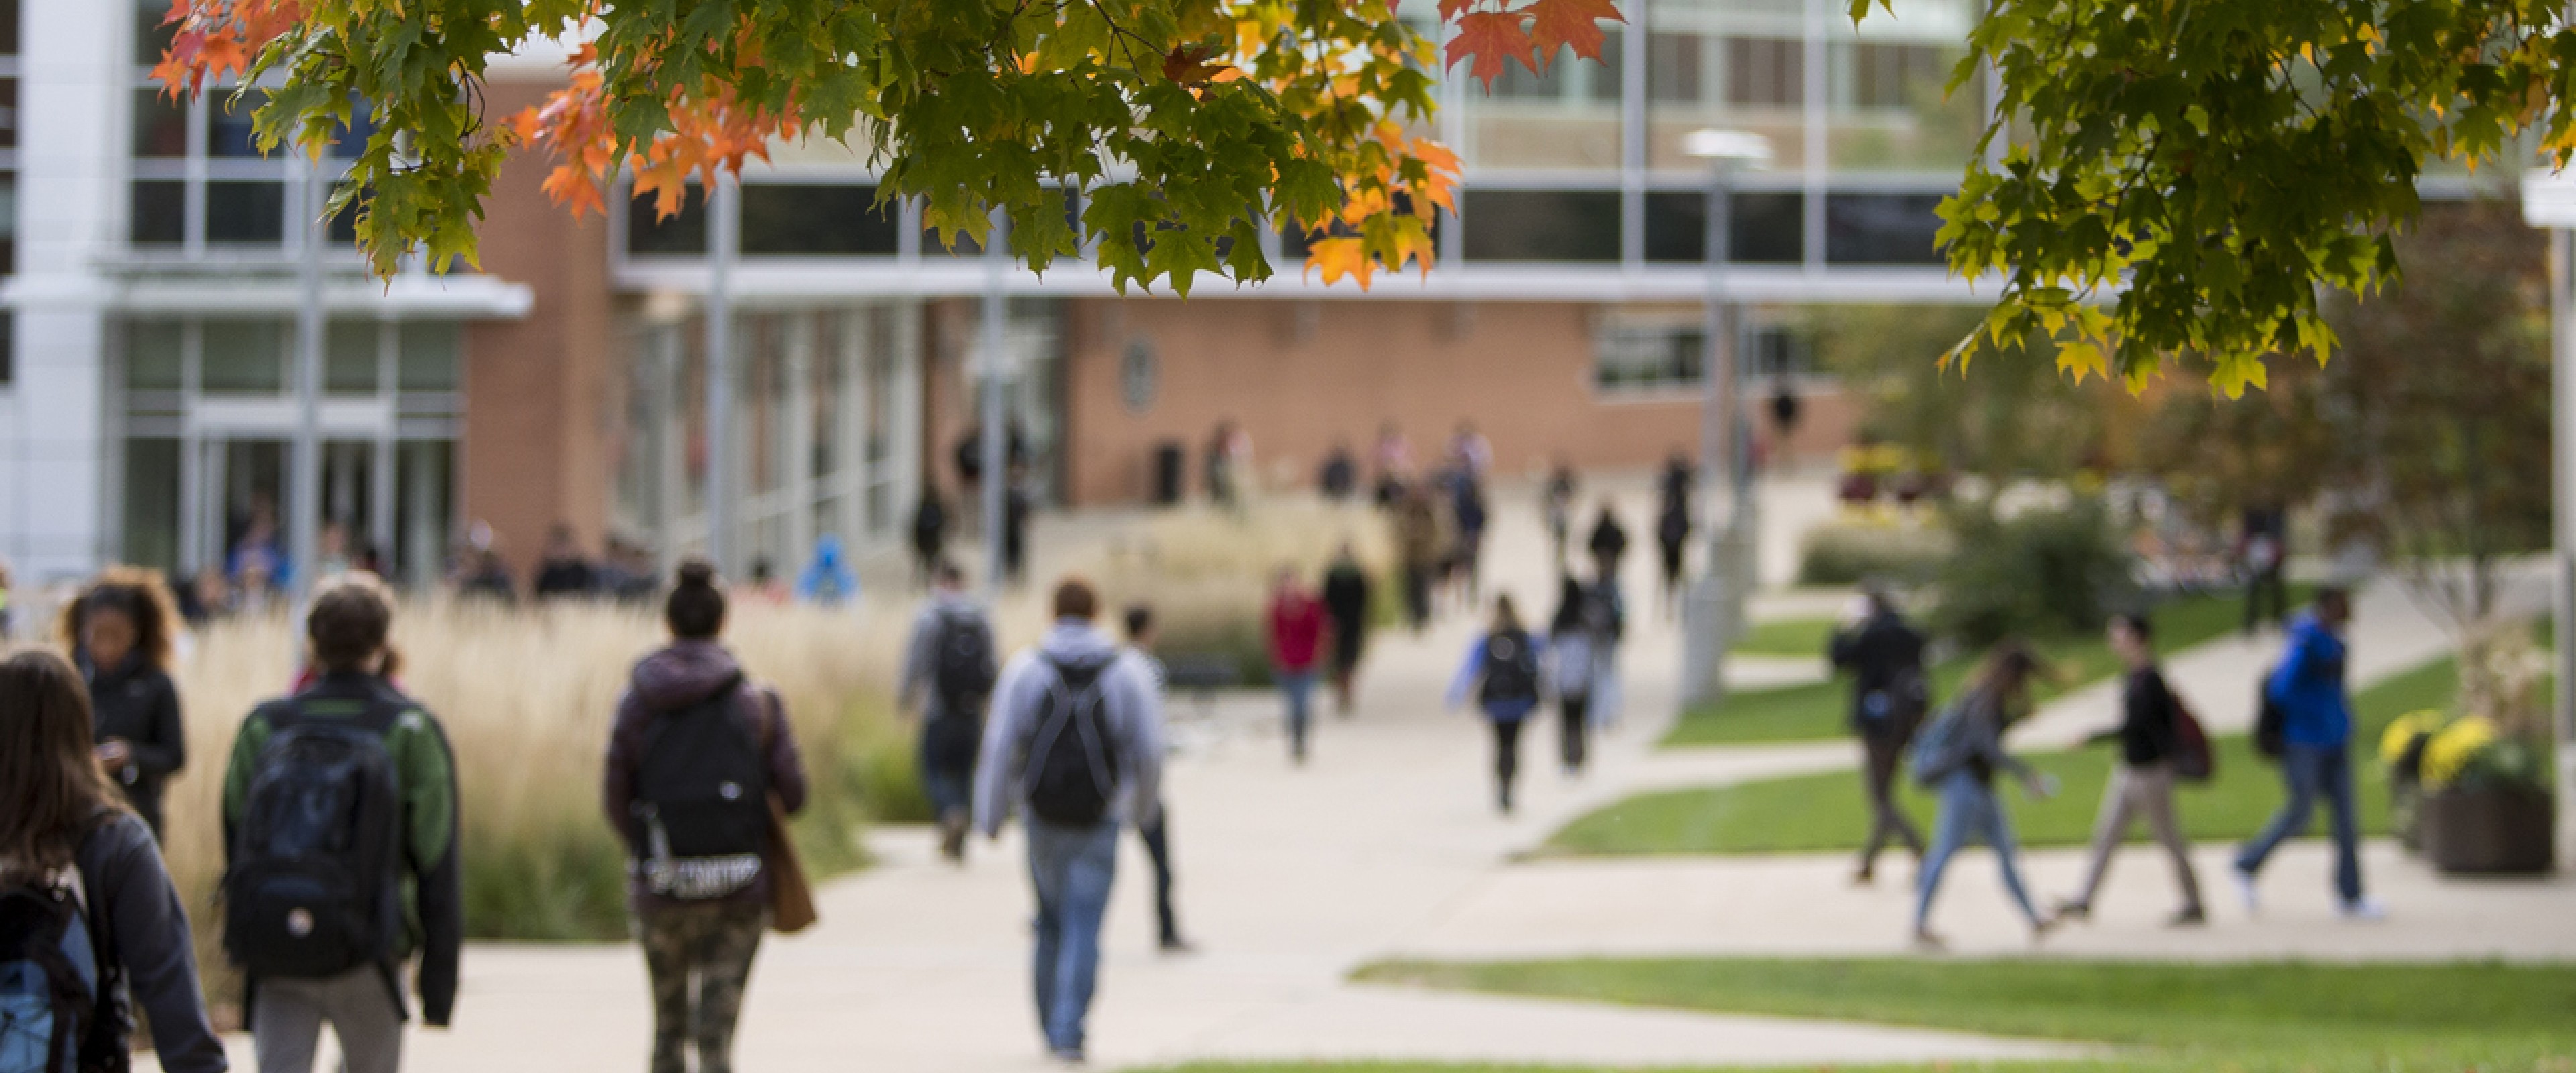 Students walking on campus during the fall season.